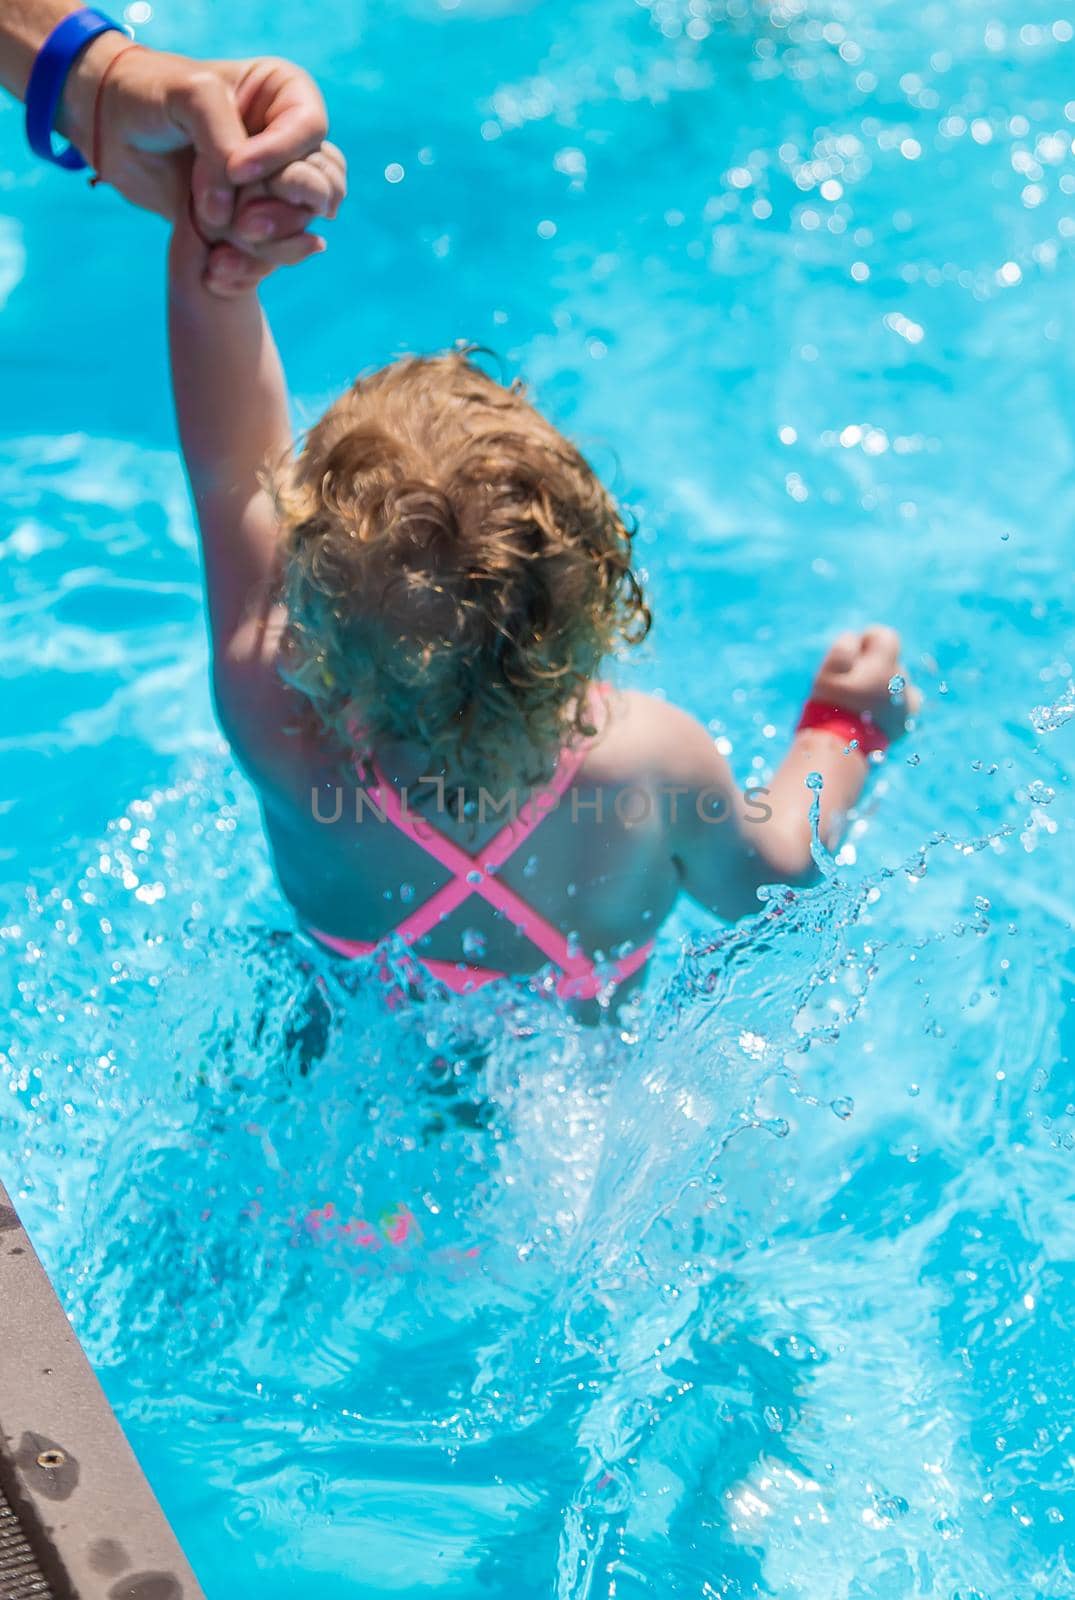 Baby swims in the pool. Selective focus. Child.